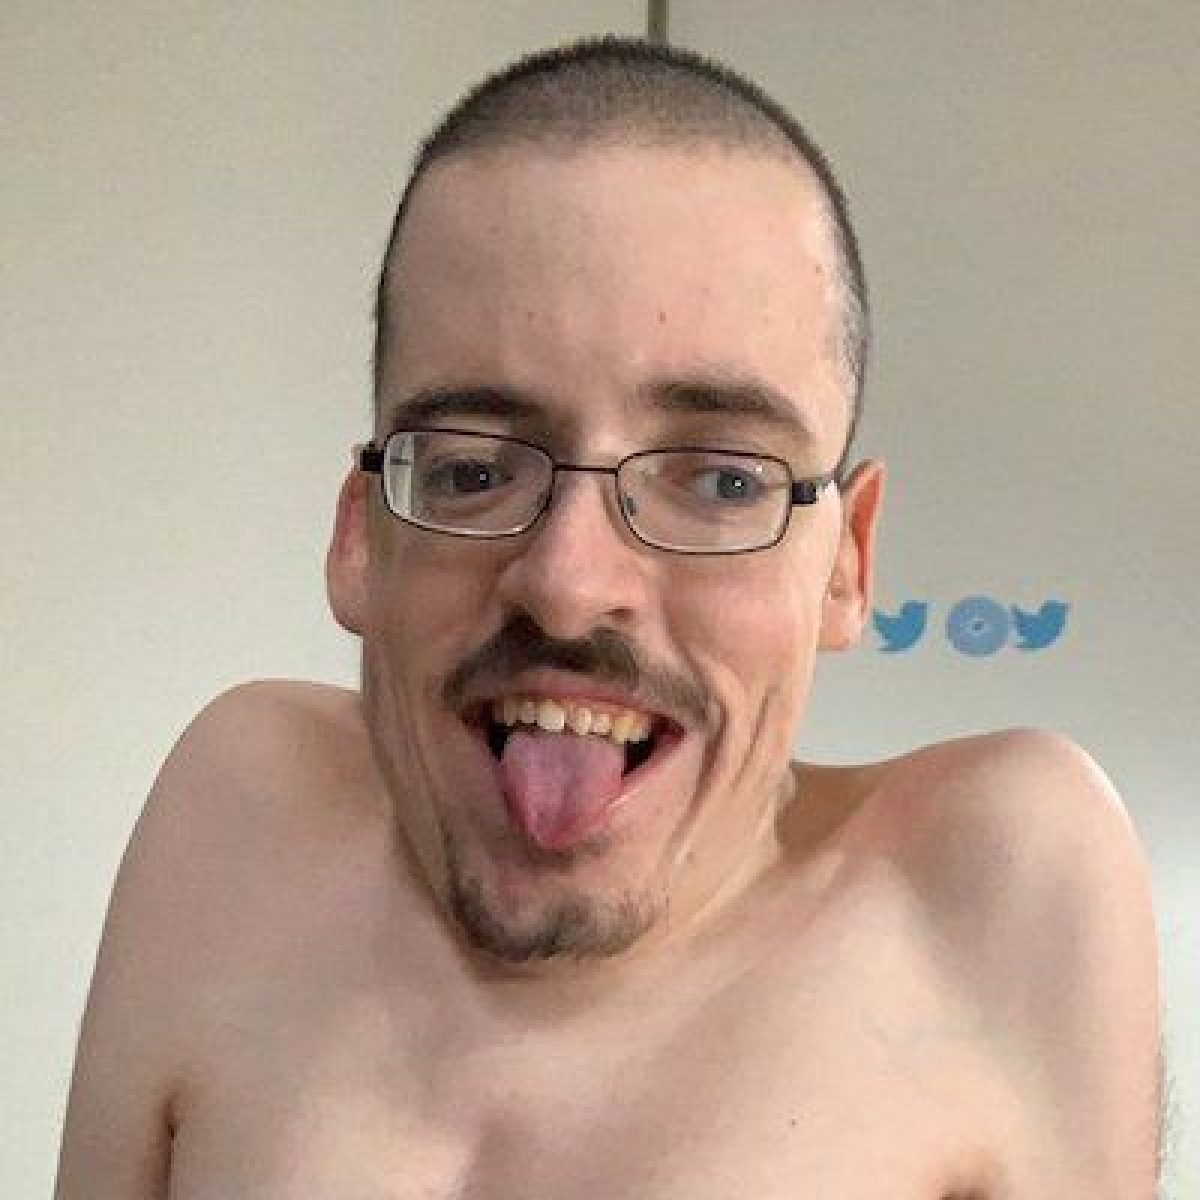 Where is ricky berwick from